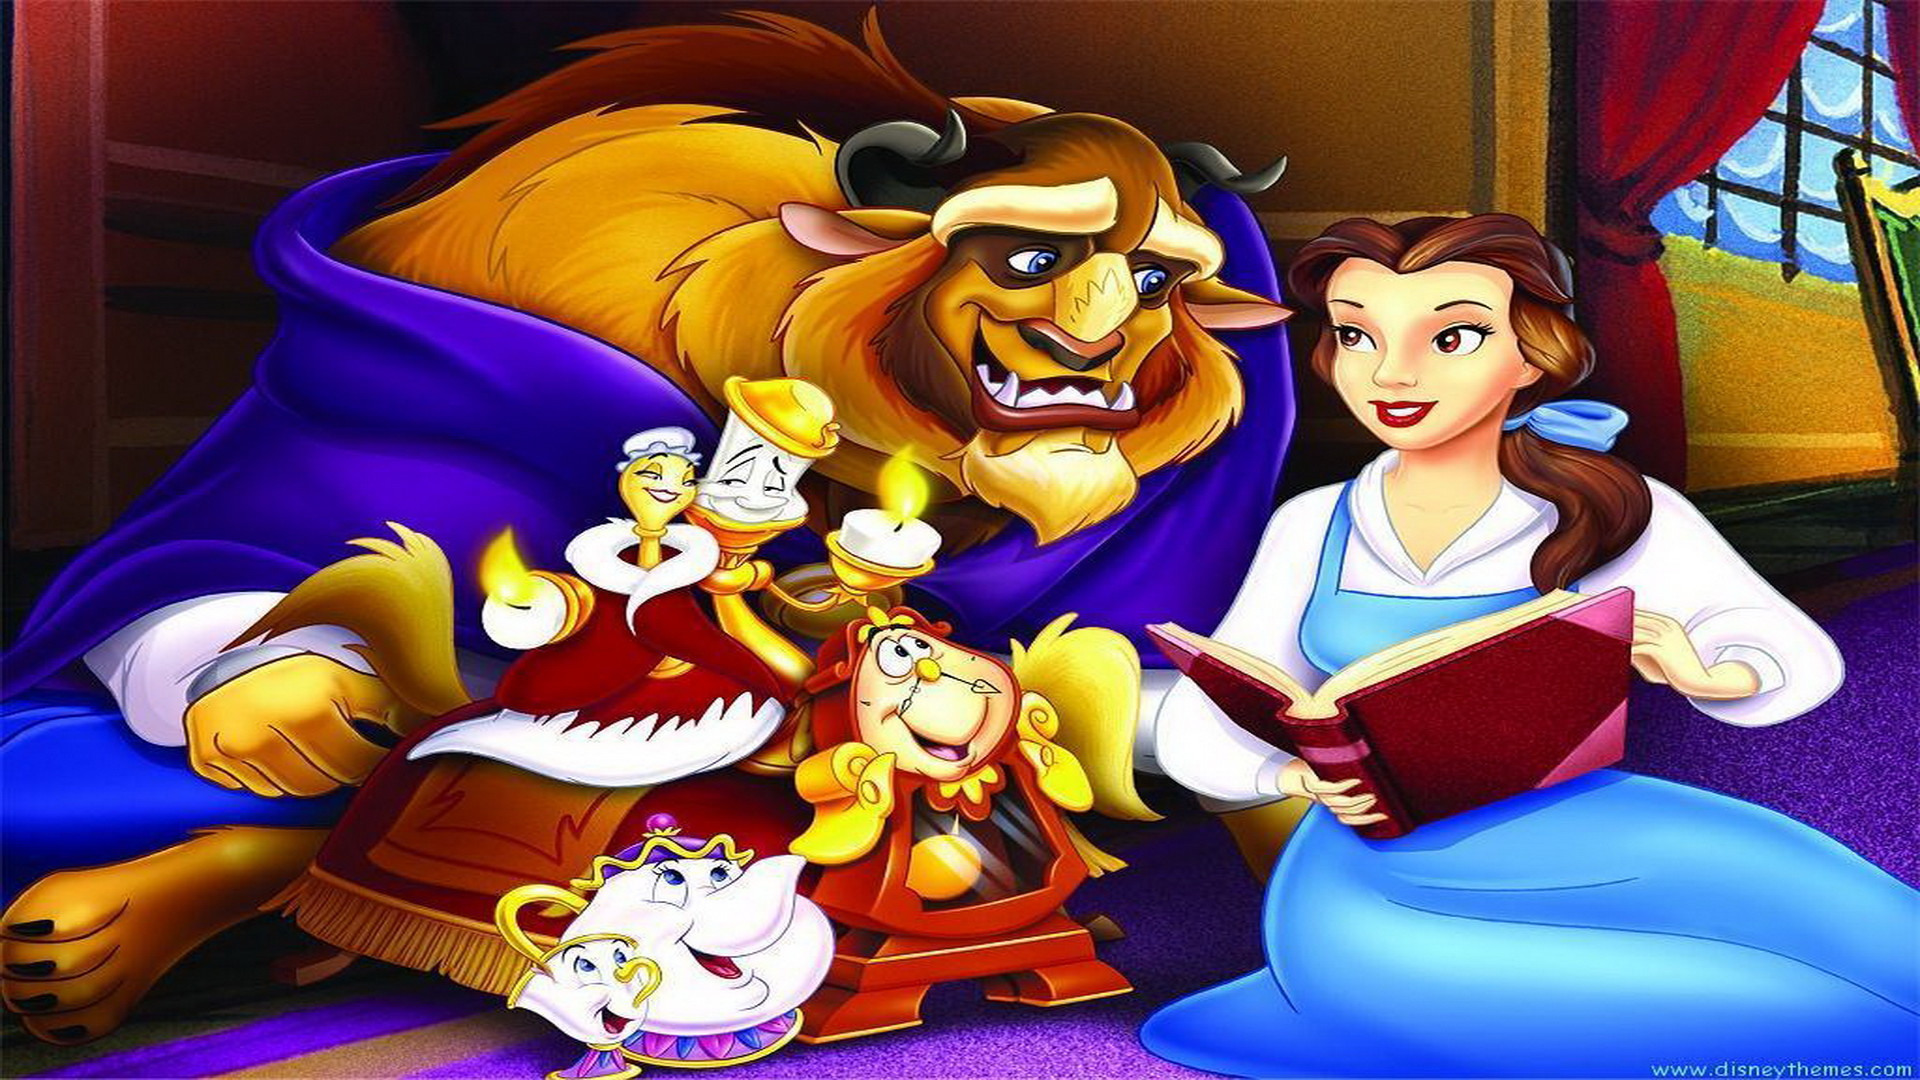 1920x1080 Beauty And The Beast Full HD Wallpaper